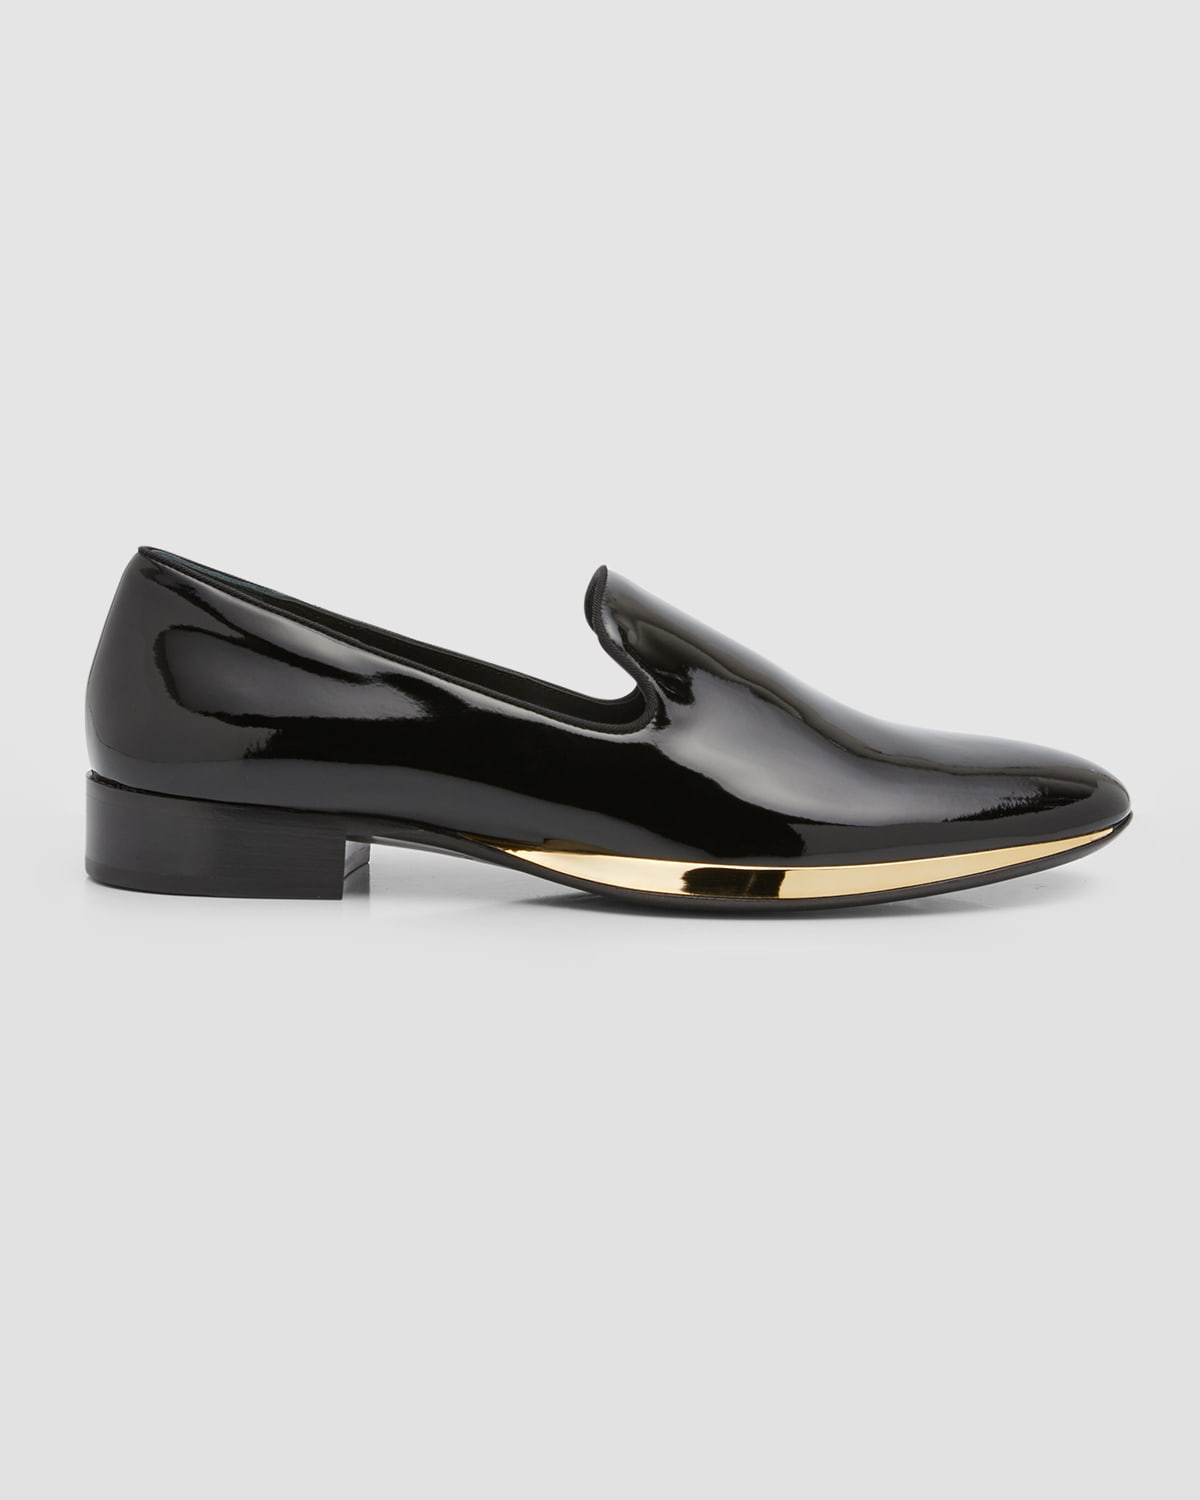 Men's Cut 15 Patent Leather Loafers